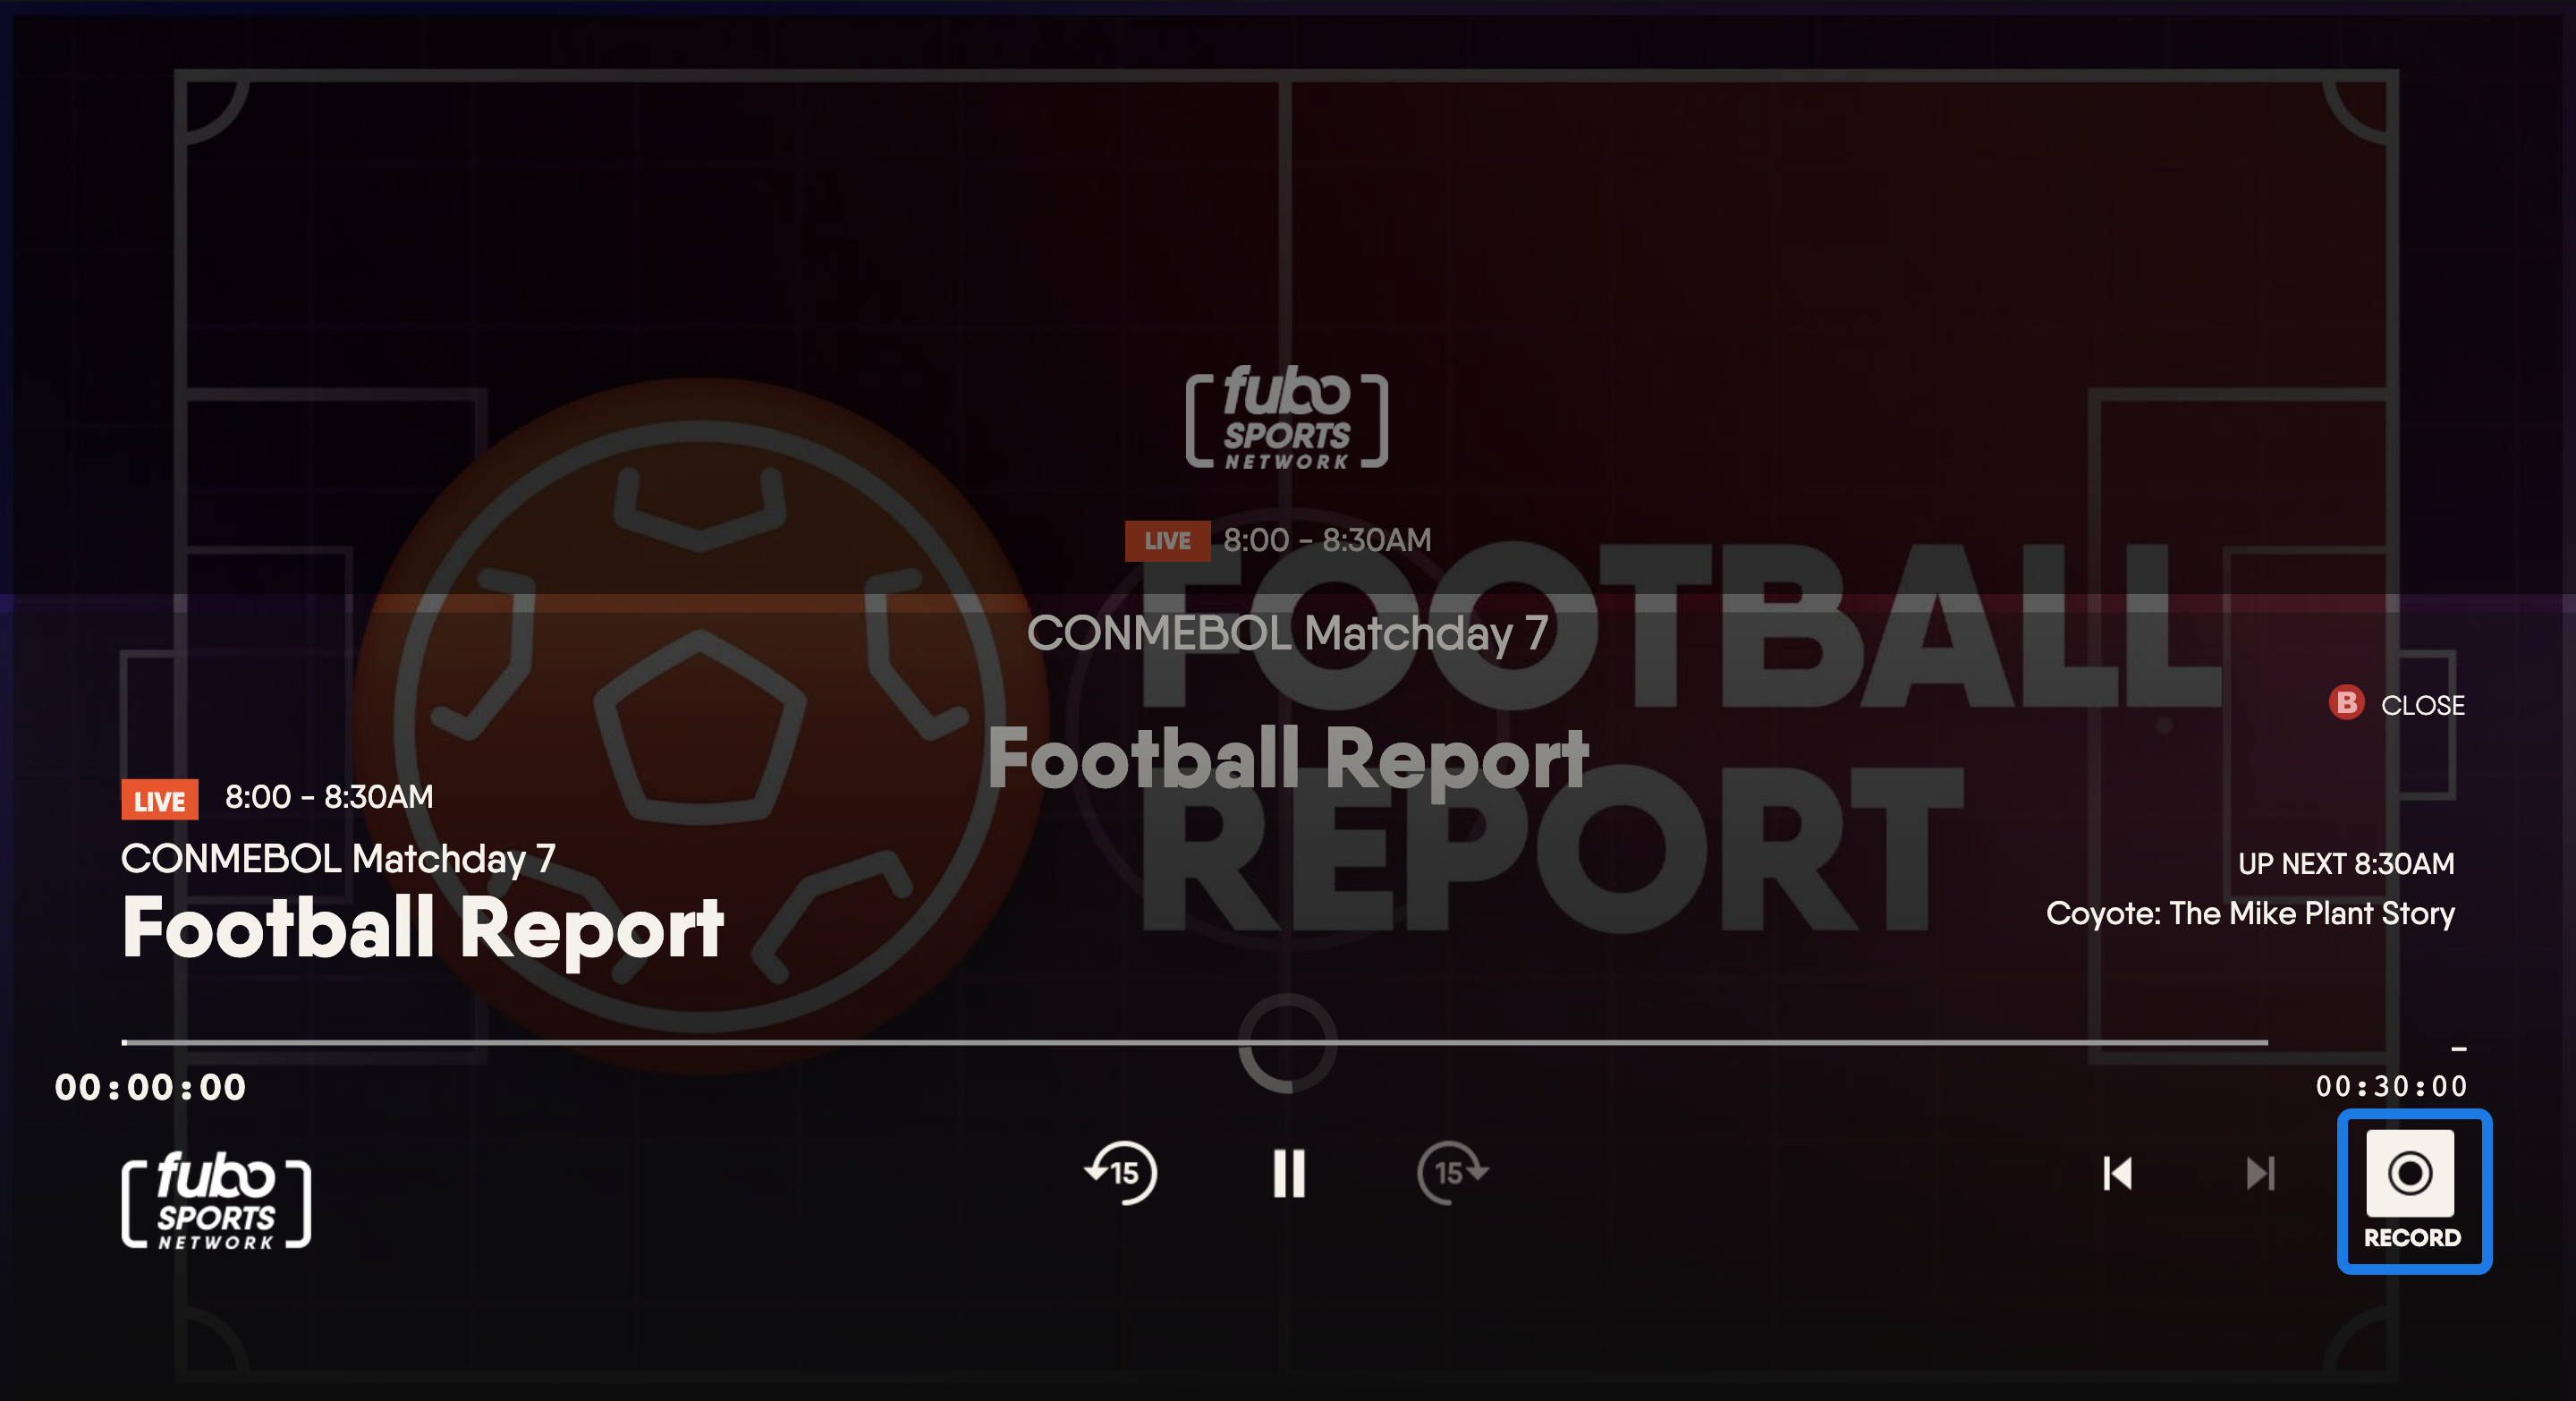 Player controls for the FuboTV app on Xbox with the RECORD option highlighted